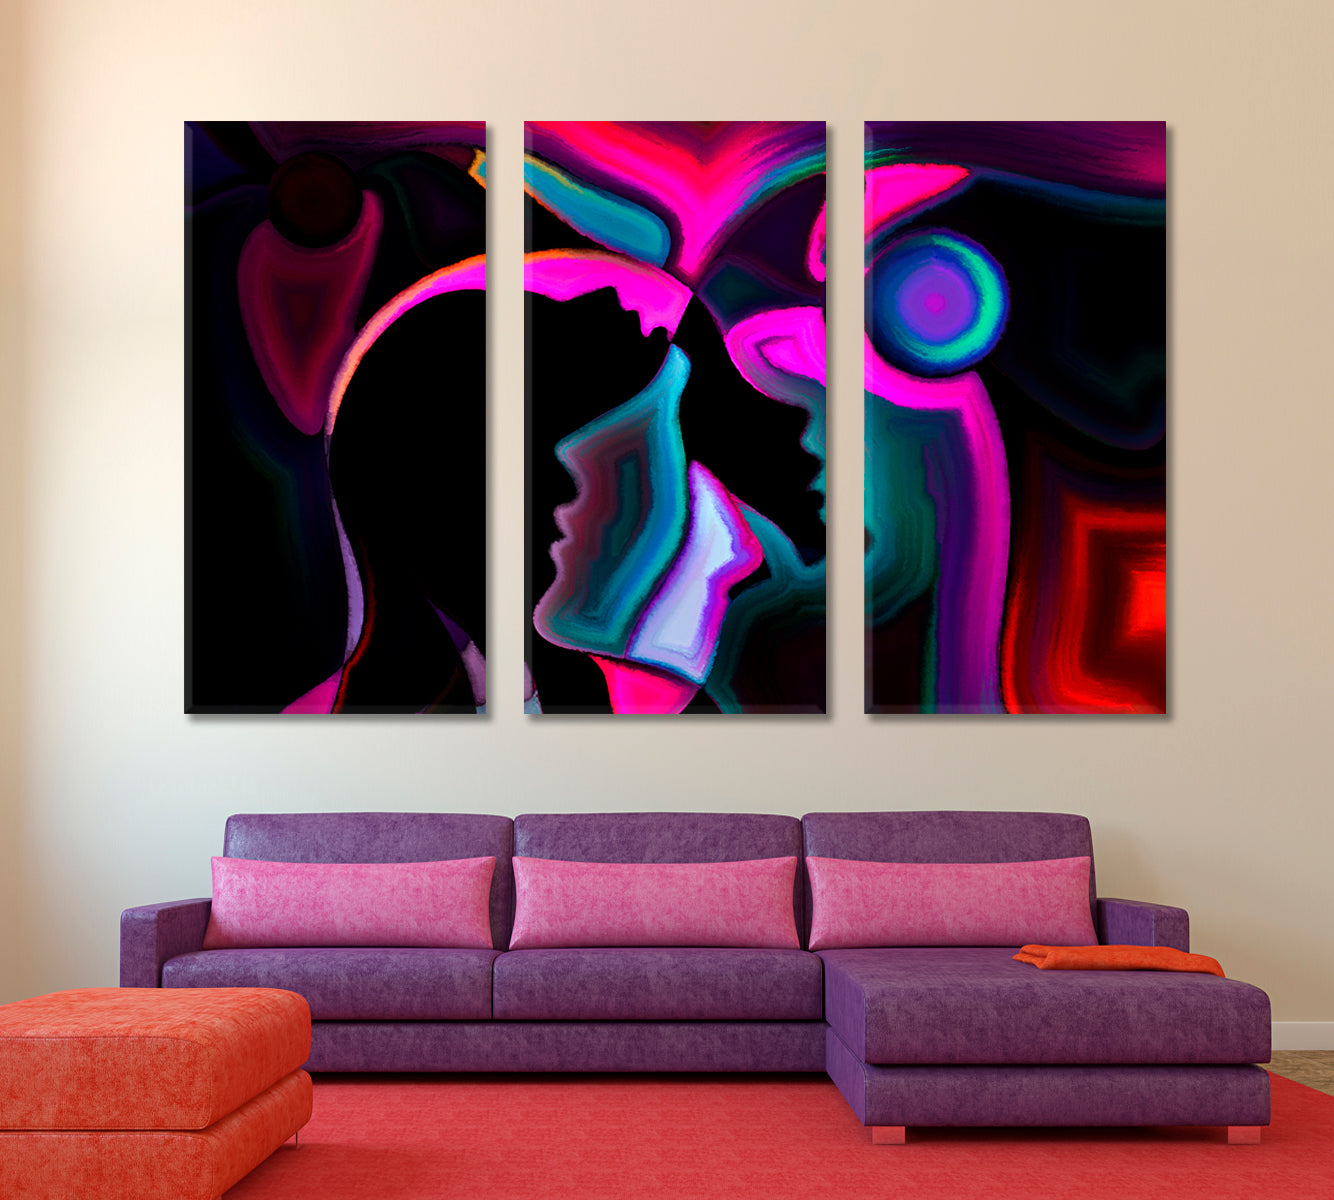 Inner World Human profiles and Colorful Shapes Abstract Art Print Artesty 3 panels 36" x 24" 